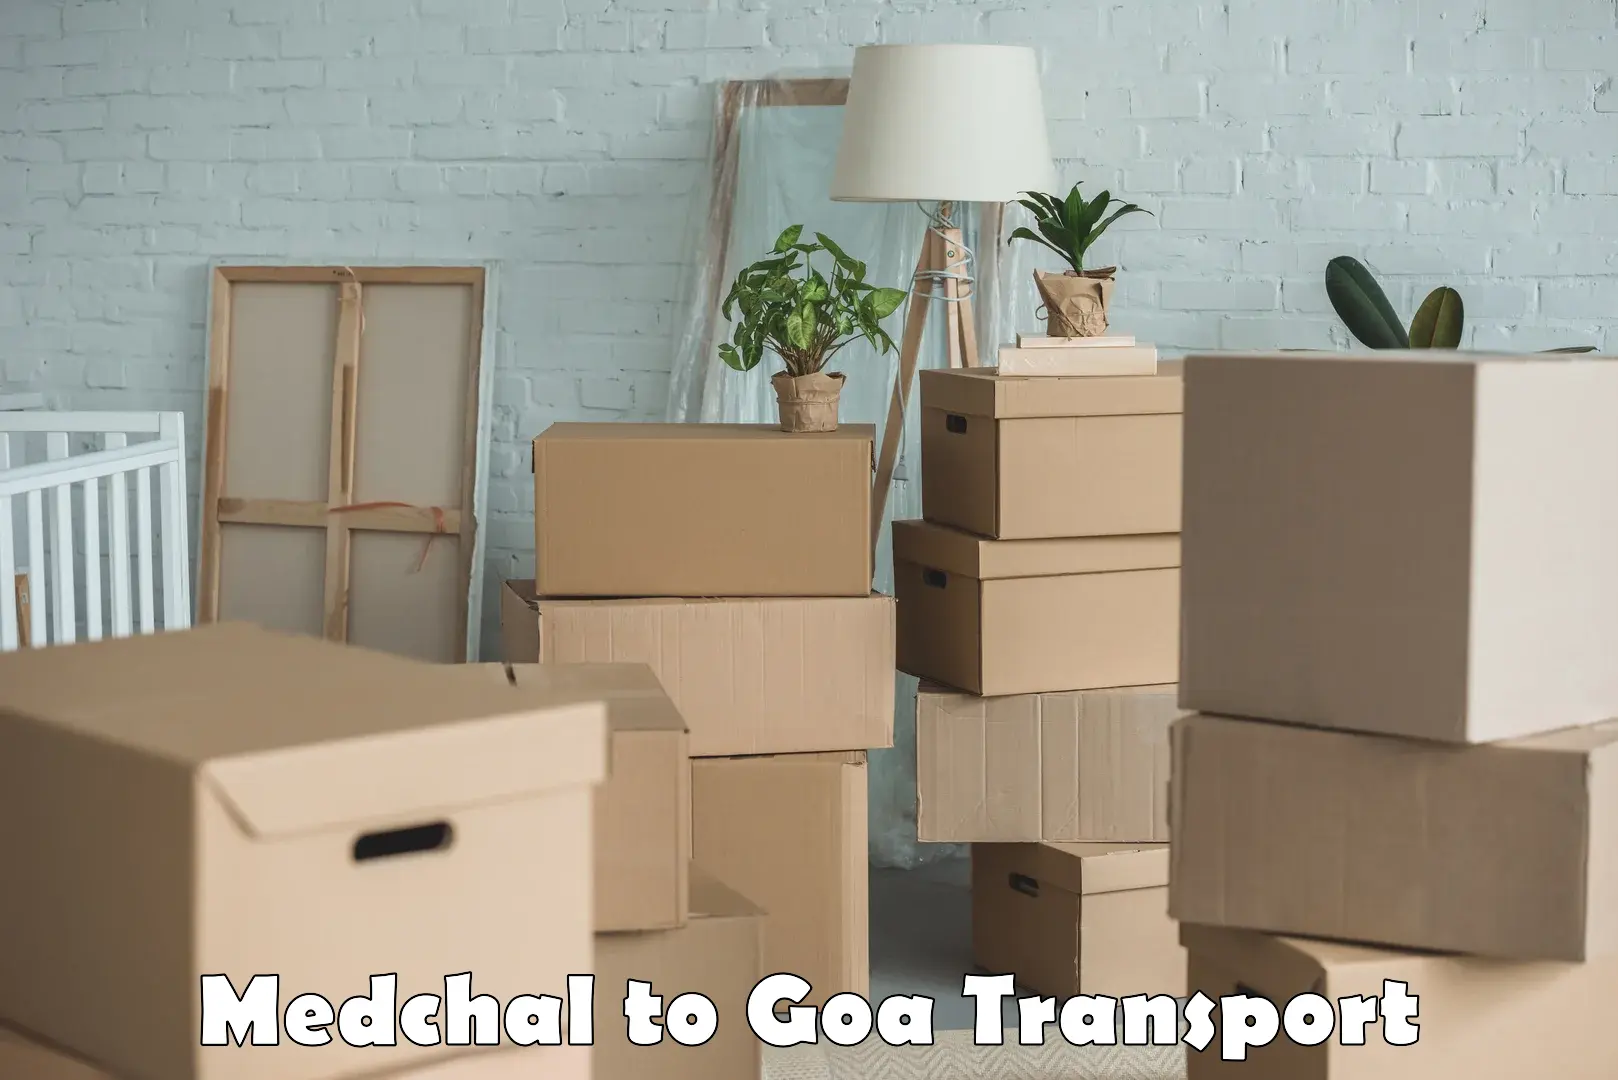 Container transport service Medchal to Panjim